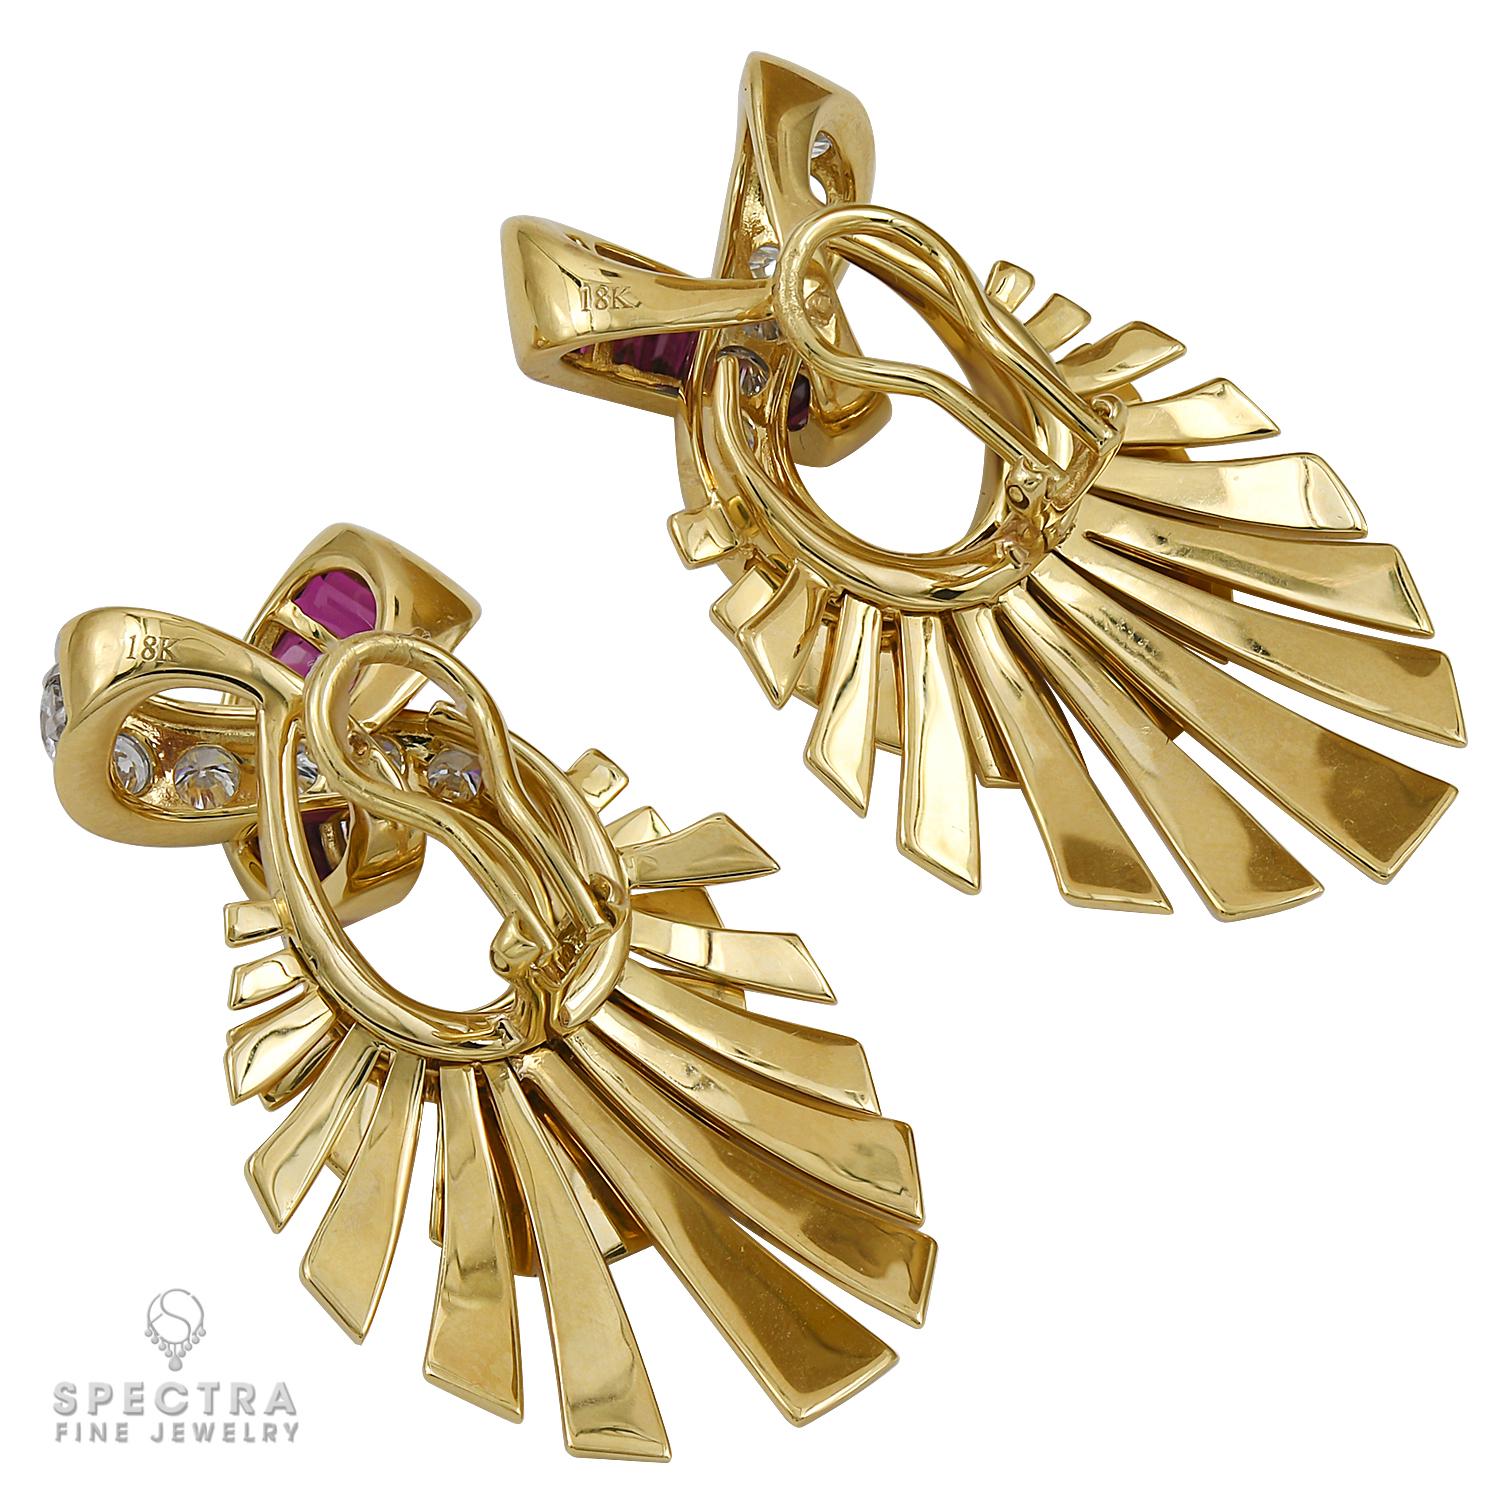 These flirtatious Fan Earrings are made in the Contemporary era, 2018, yet suggest a retro glamour that harkens back to the Art Deco period. This mirror image pair of pierced earrings with French clips is crafted in highly polished 18K yellow gold